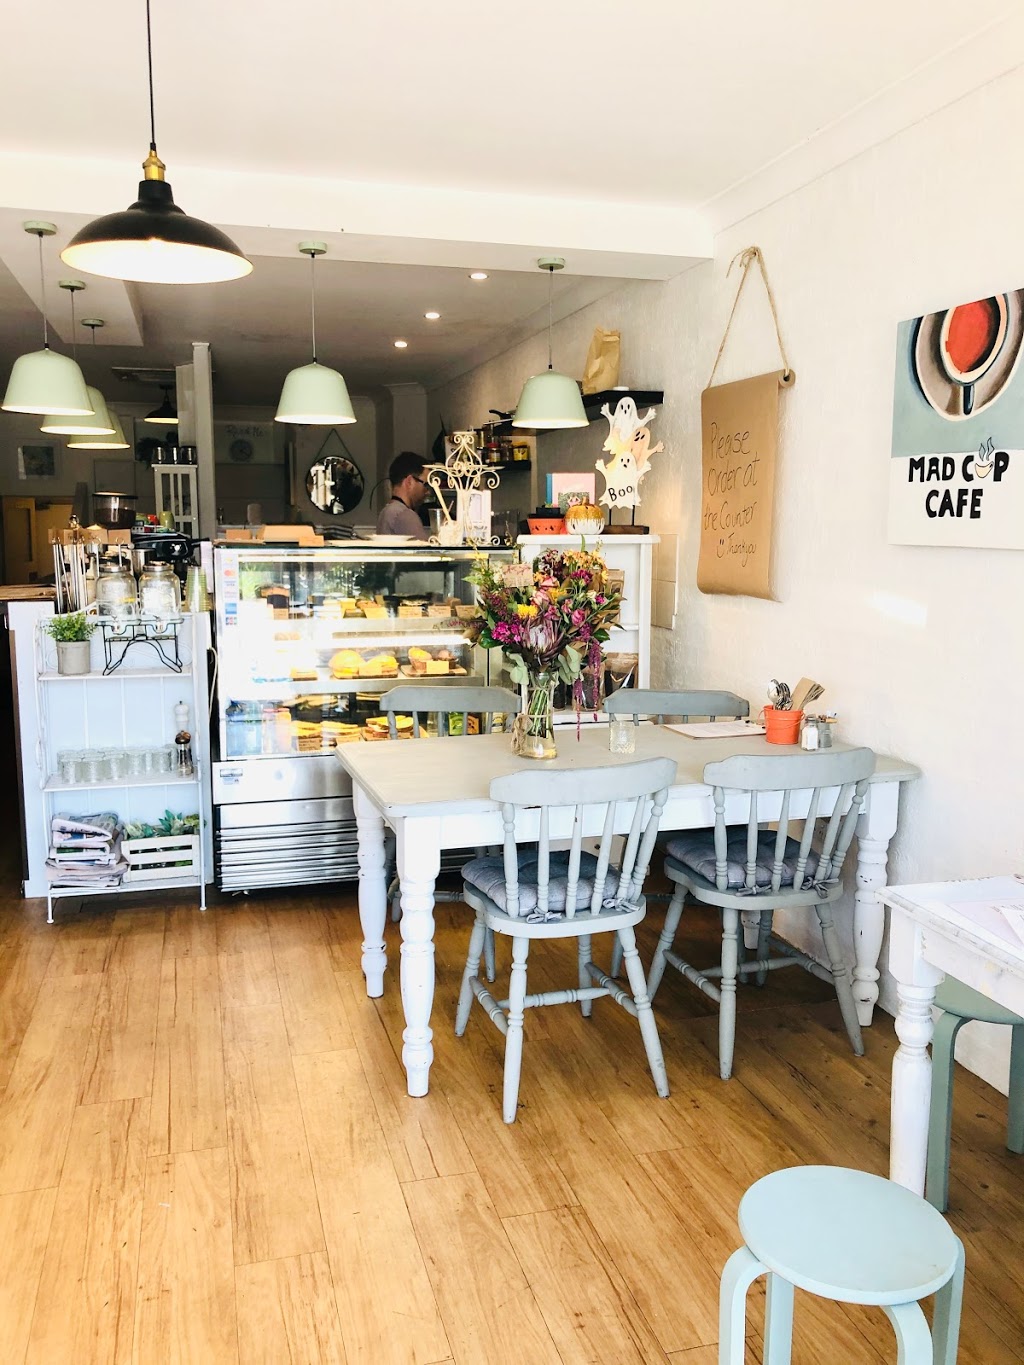 Mad Cup Cafe | cafe | 28/145 Balgownie Rd, Balgownie NSW 2519, Australia | 0439161408 OR +61 439 161 408